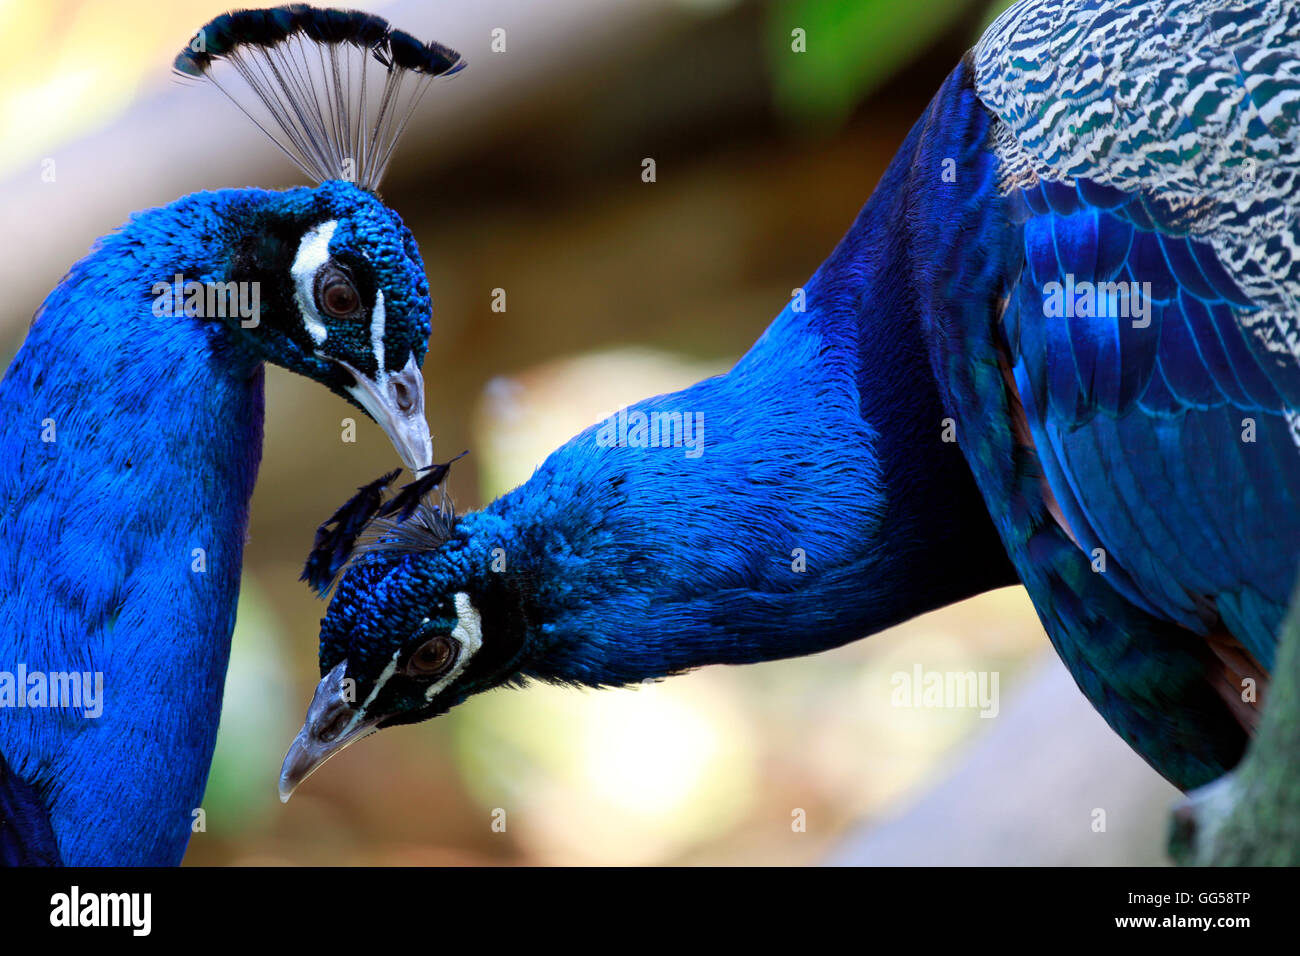 Two  male Indian peafowl (peacock) grooming each other at World of Birds, Hout Bay, Cape Town, South Africa. Stock Photo